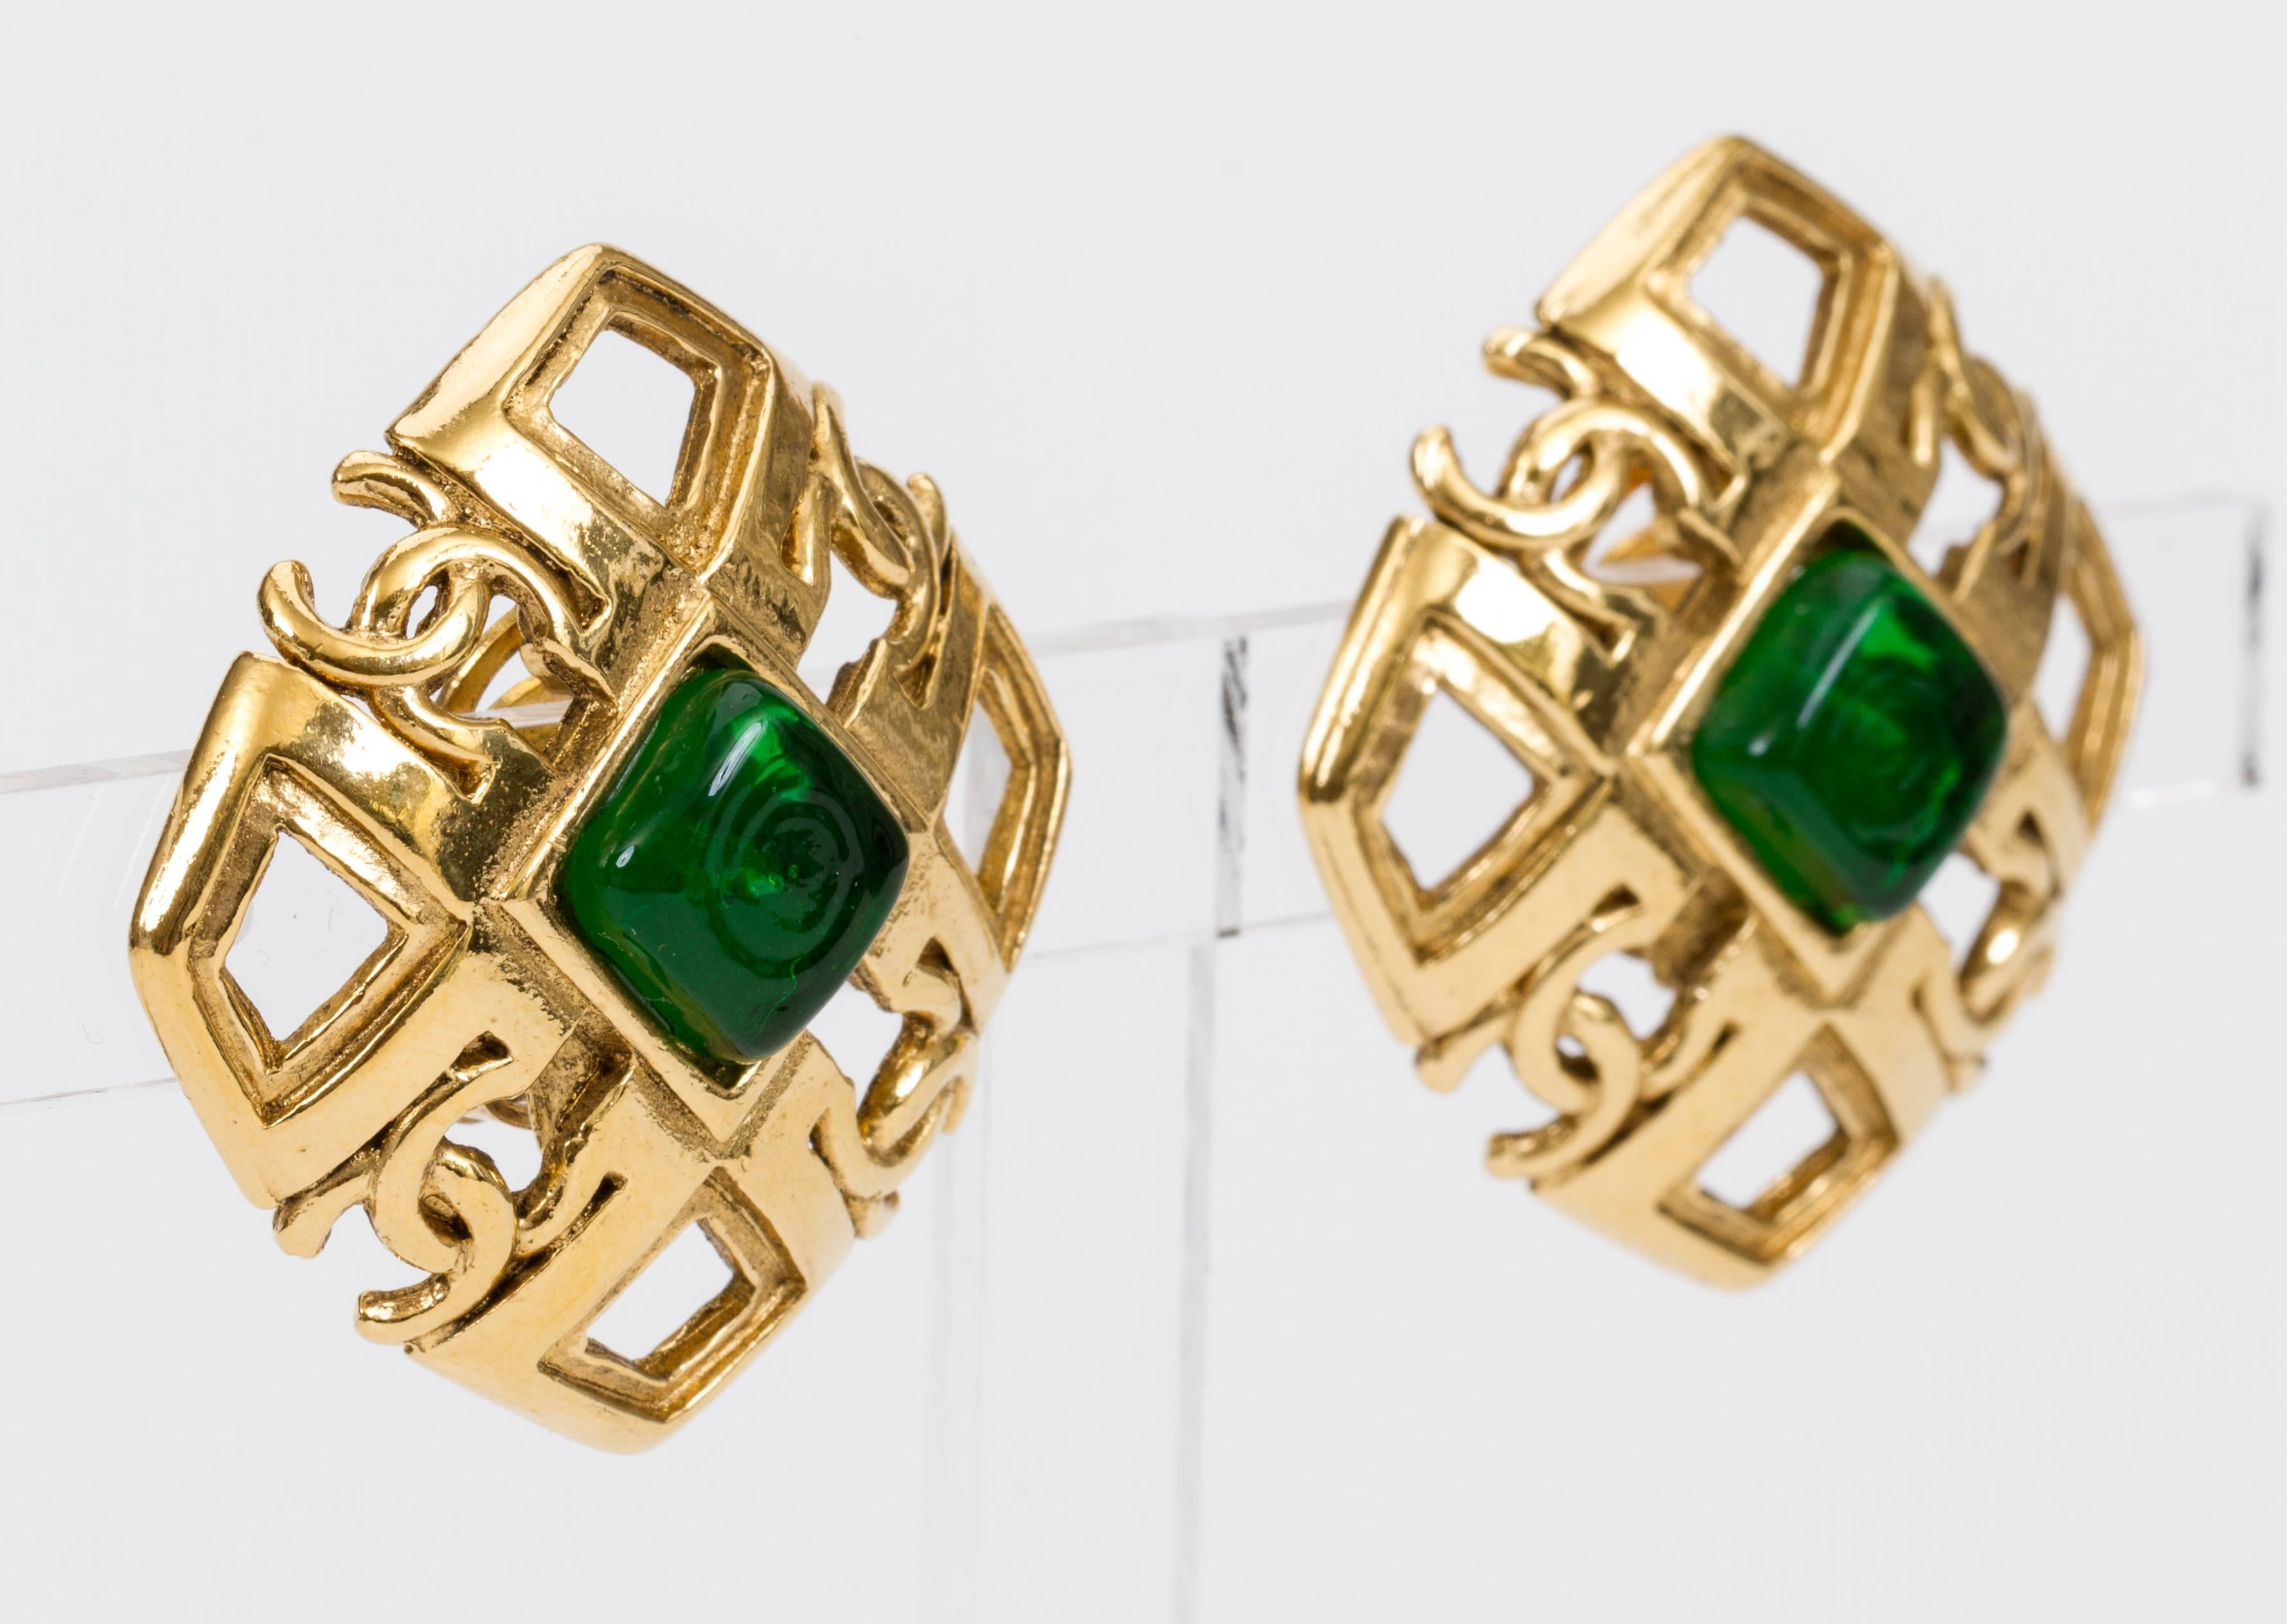 Chanel square logo green gripoix earrings. Collection 23, circa 1985. Comes with original box. Minor wear.